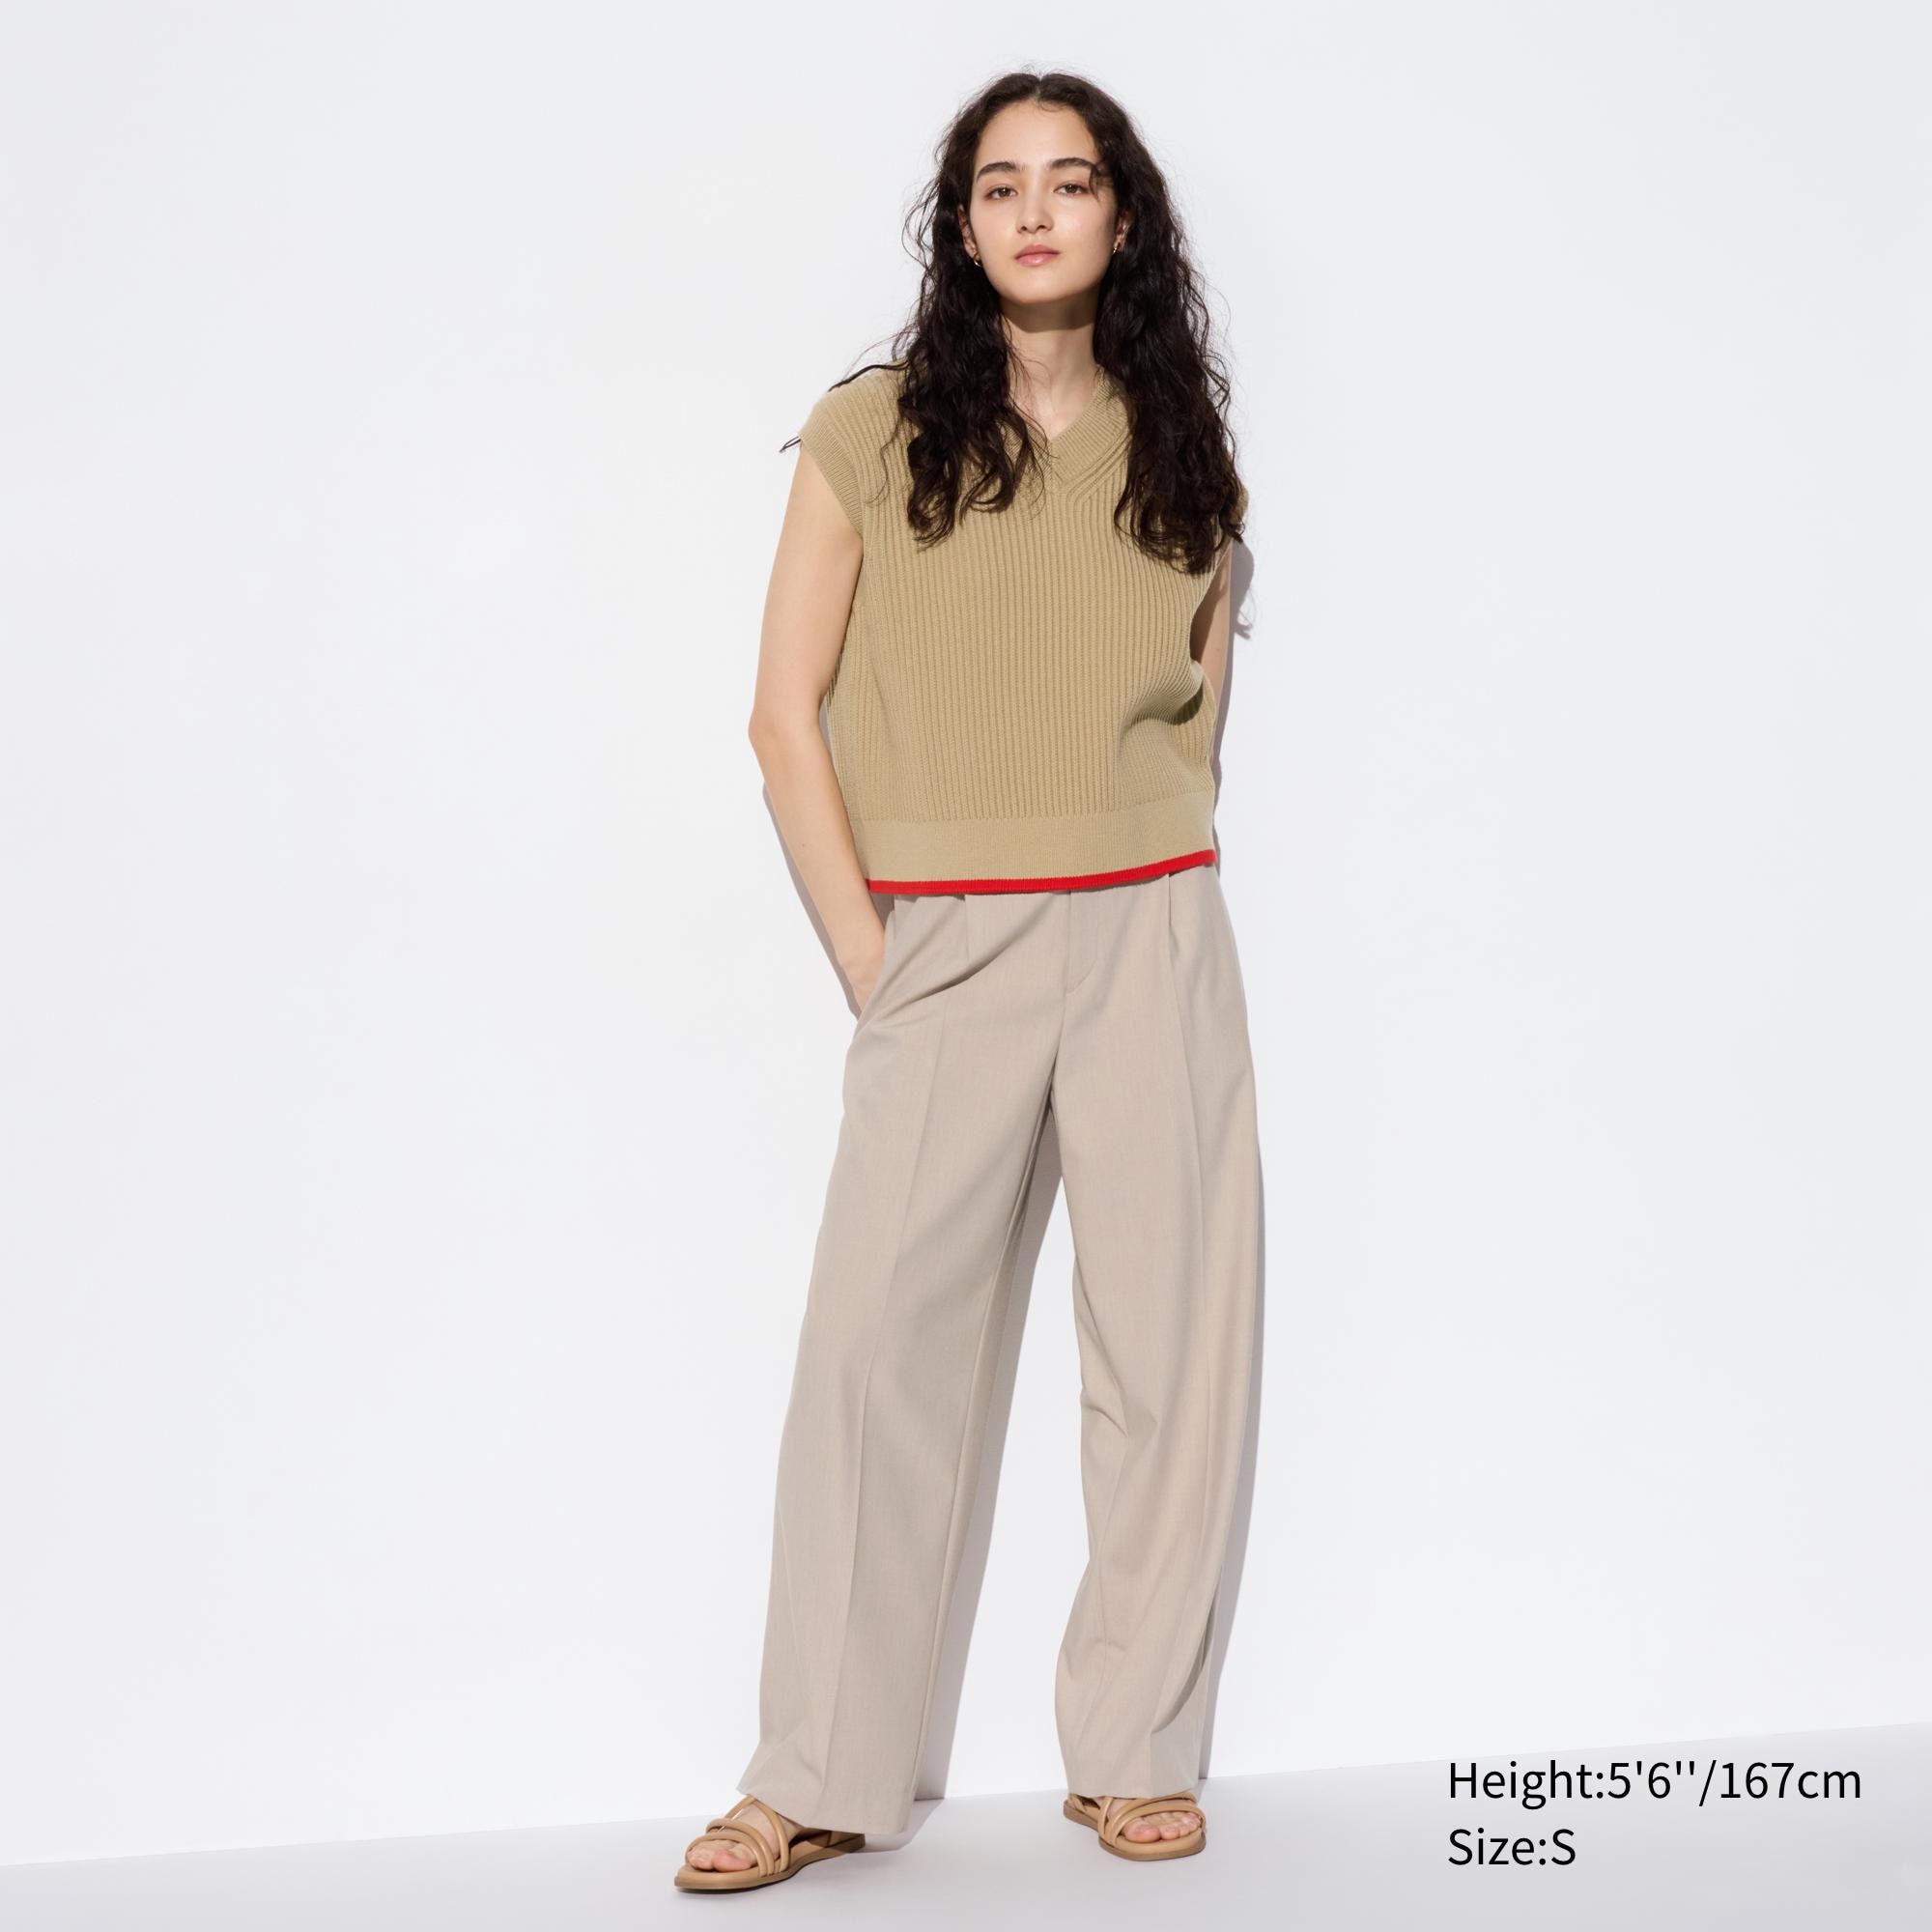 UNIQLO on X: These wide leg pants are going to be in every fashionista's  closet. Hurry and click add to bag before they're gone.   #SimpleMadeBetter #UniqloUSA   / X